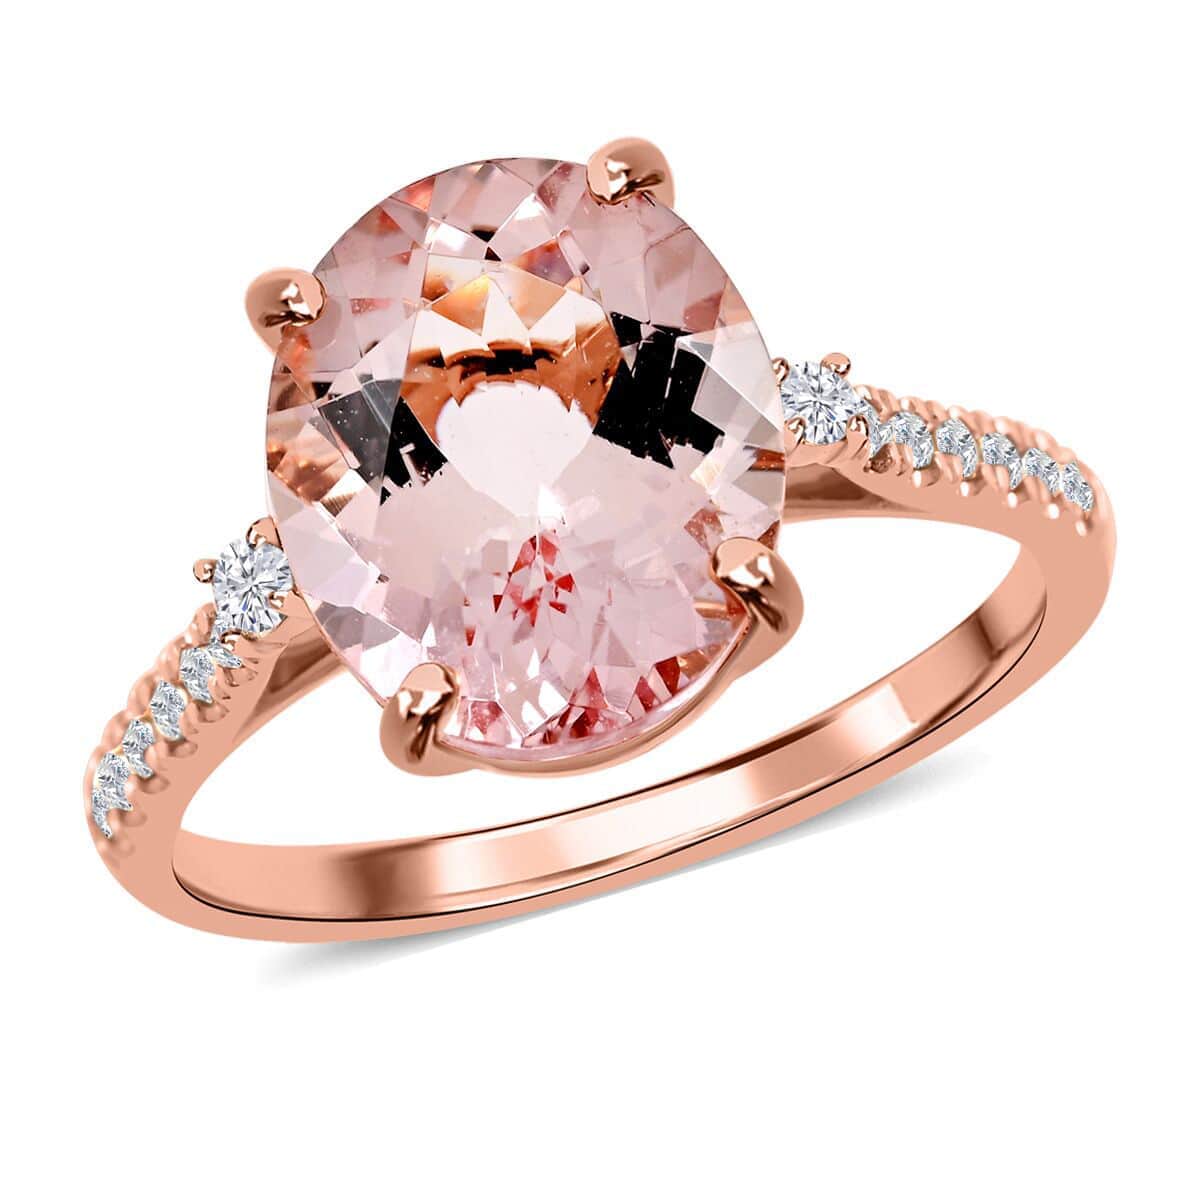 Pendant with a morganite of over 47 carats, pink tourmalines and